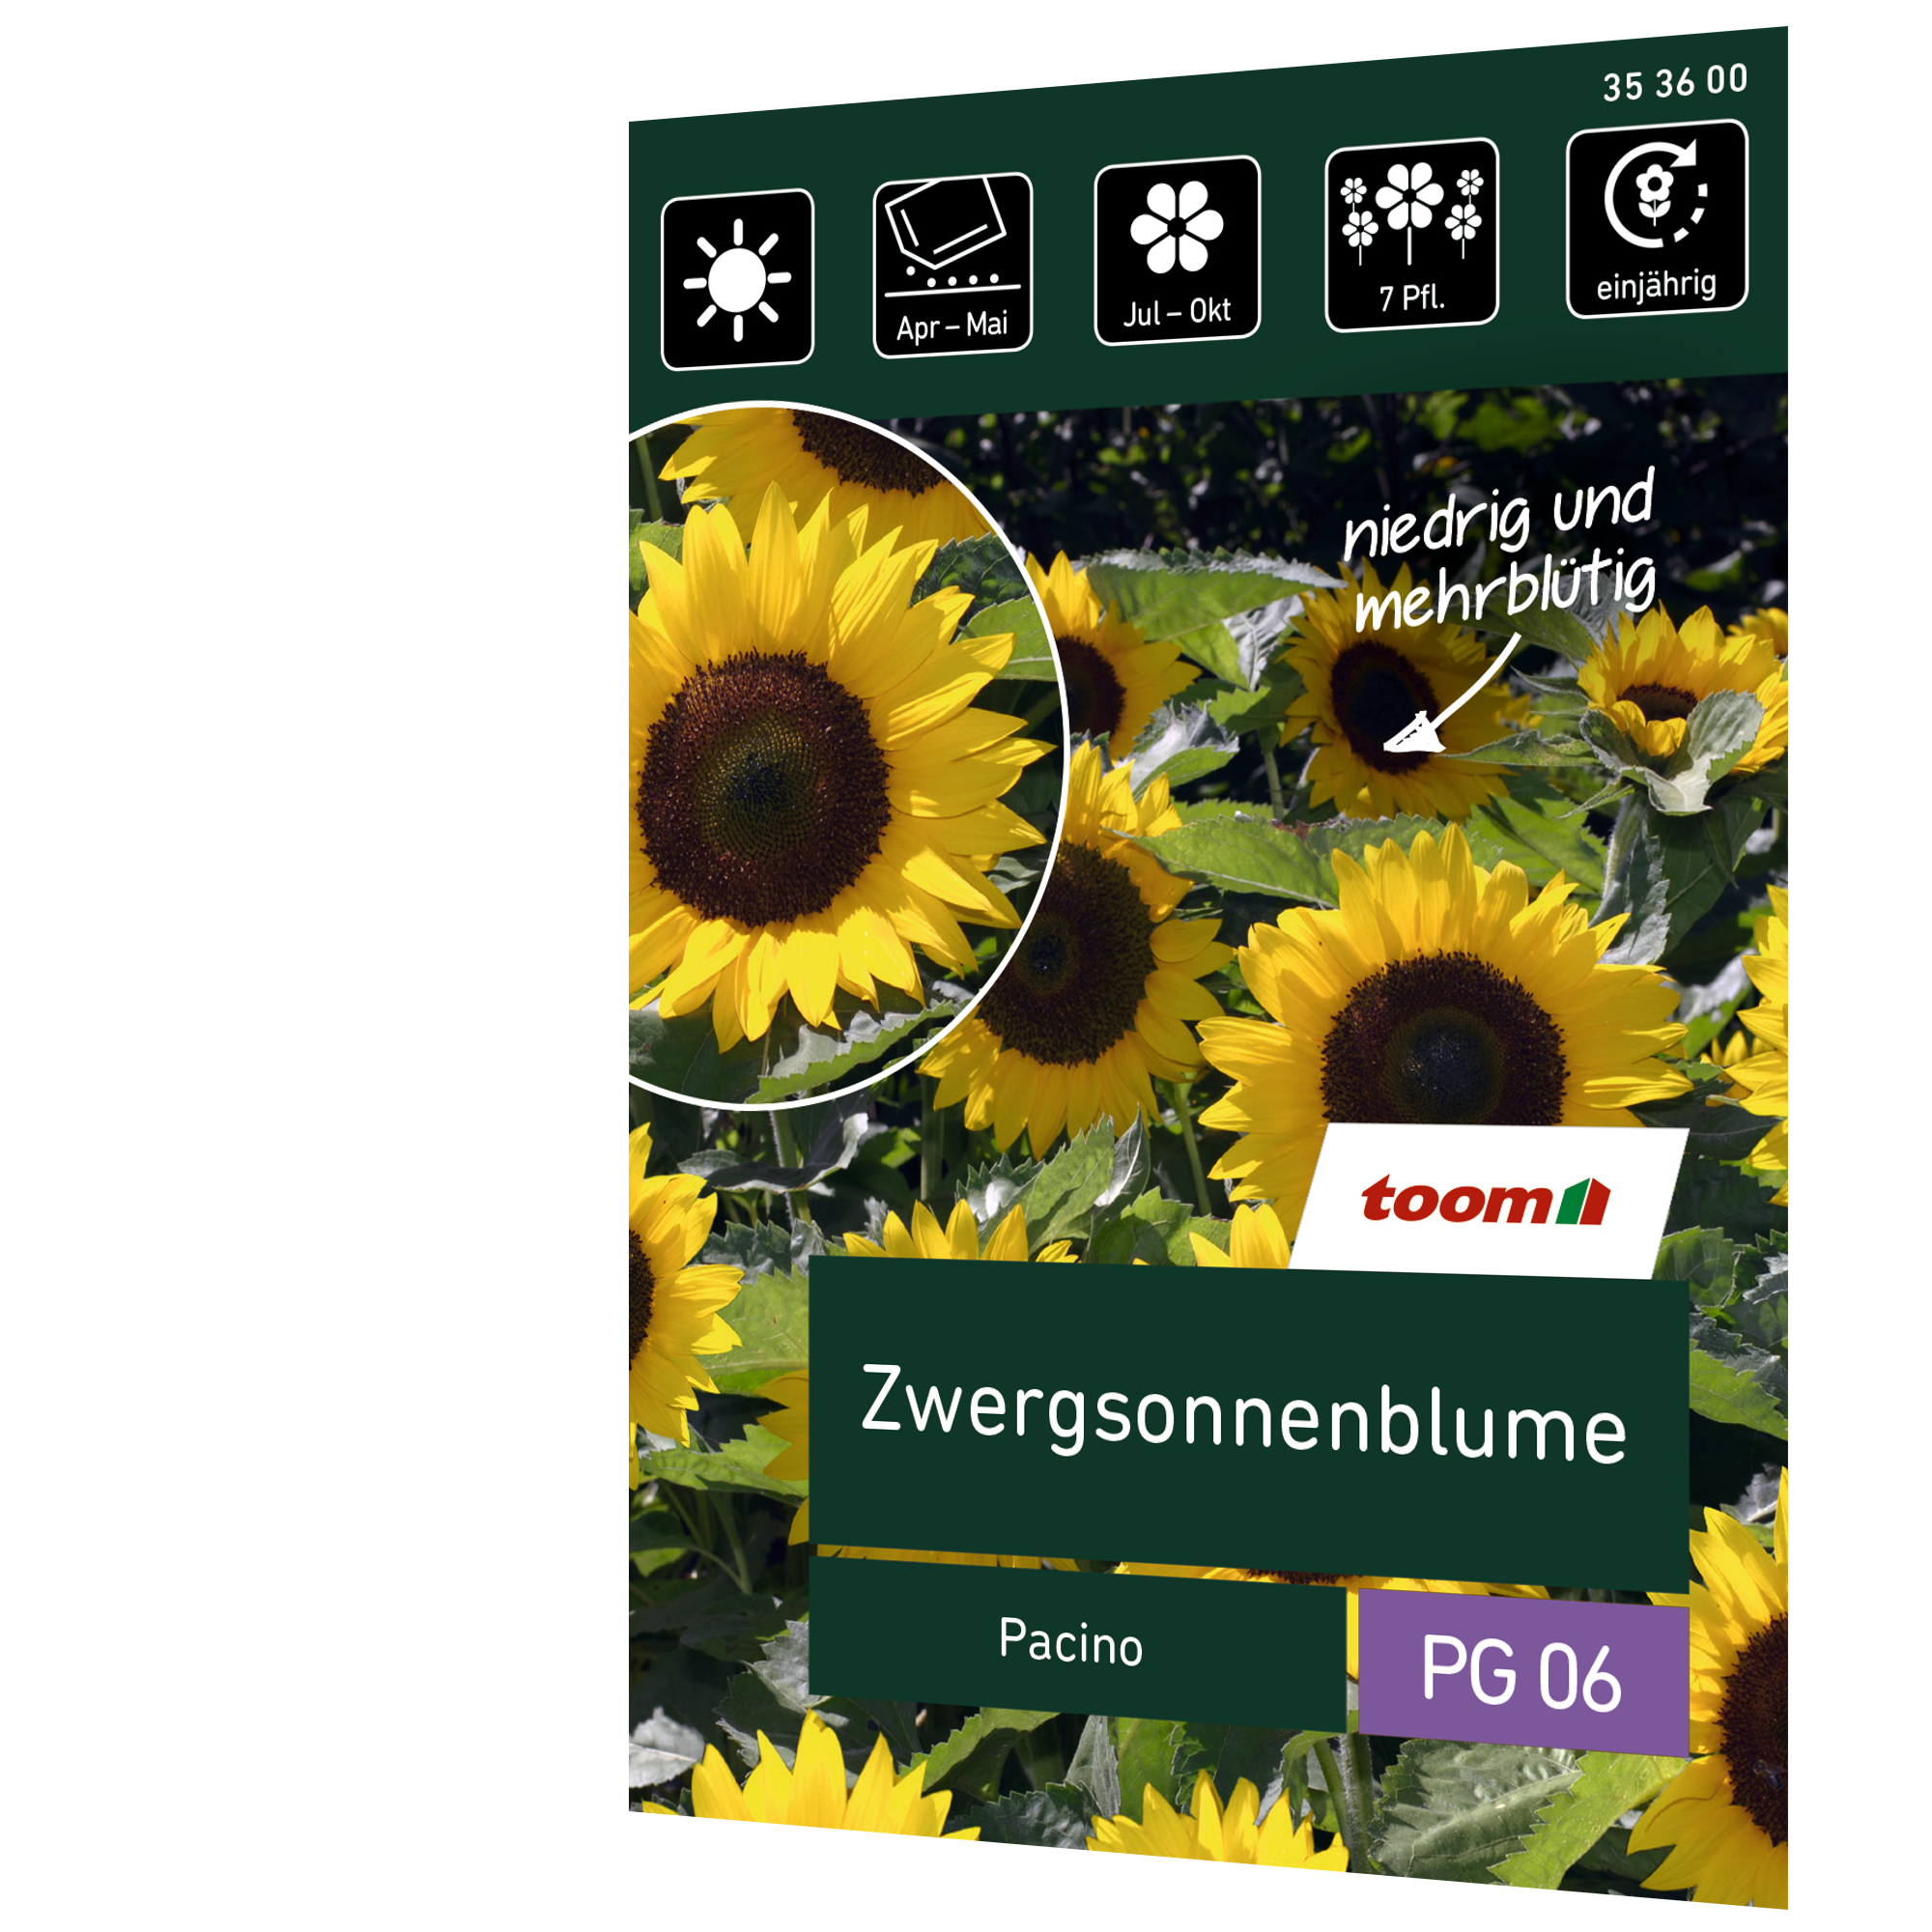 Zwergsonnenblume 'Pacino' + product picture